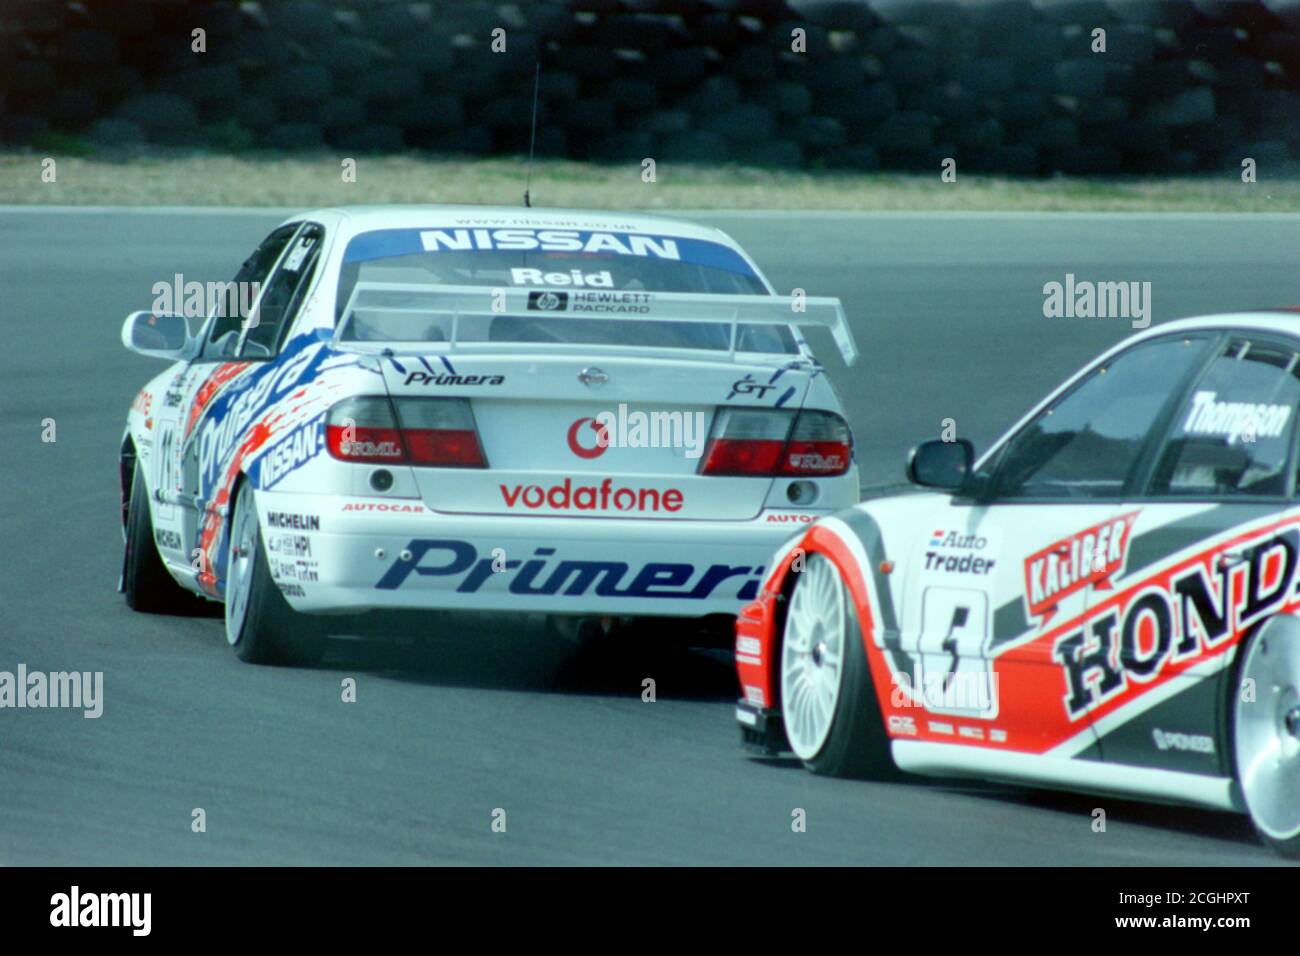 Archive image: British Touring Car Championships at Brands Hatch on 31st August 1998, image scanned from colour negative. Anthony Reid in the Nissan Primera GT of Vodafone Nissan Racing team. Stock Photo